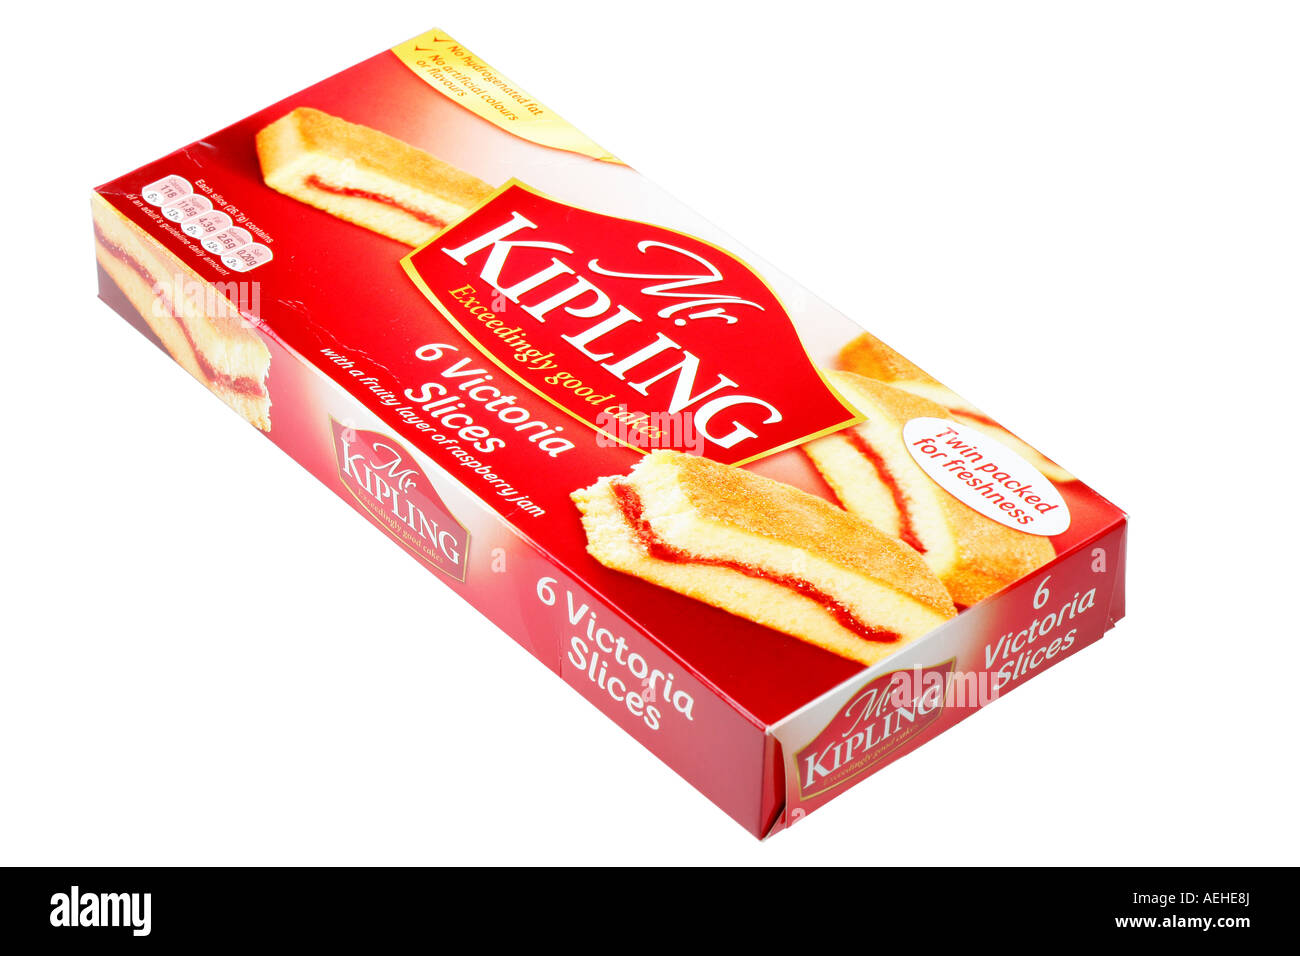 Mr kipling victoria slice Cut Out Stock Images & Pictures - Alamy